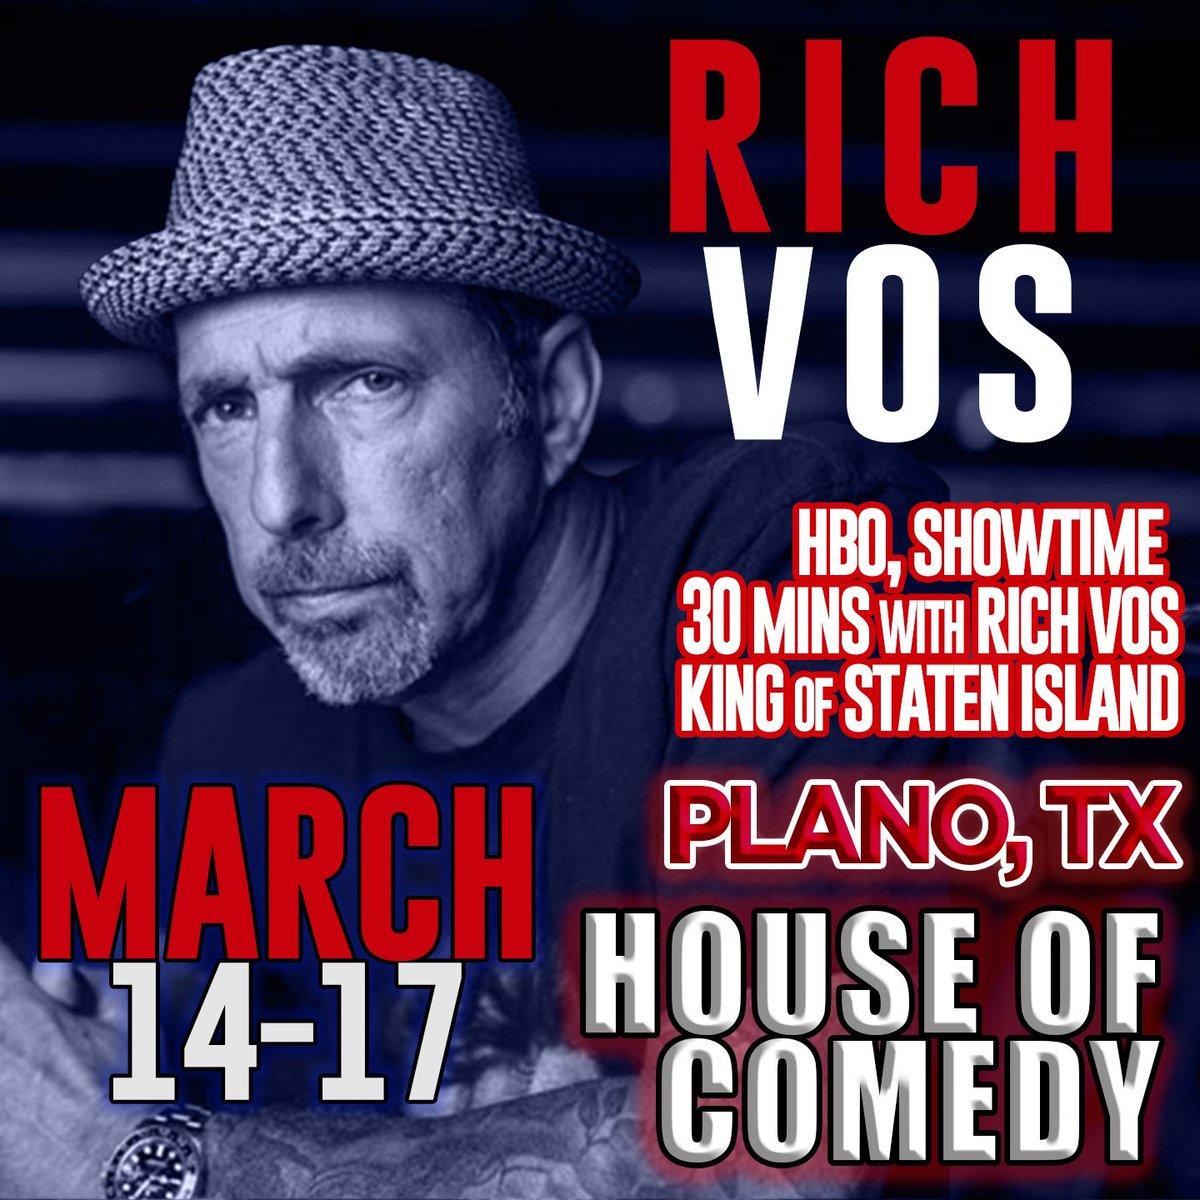 This week, @houseofcomedytx 3/14-3/17! RichVos.com for more dates!